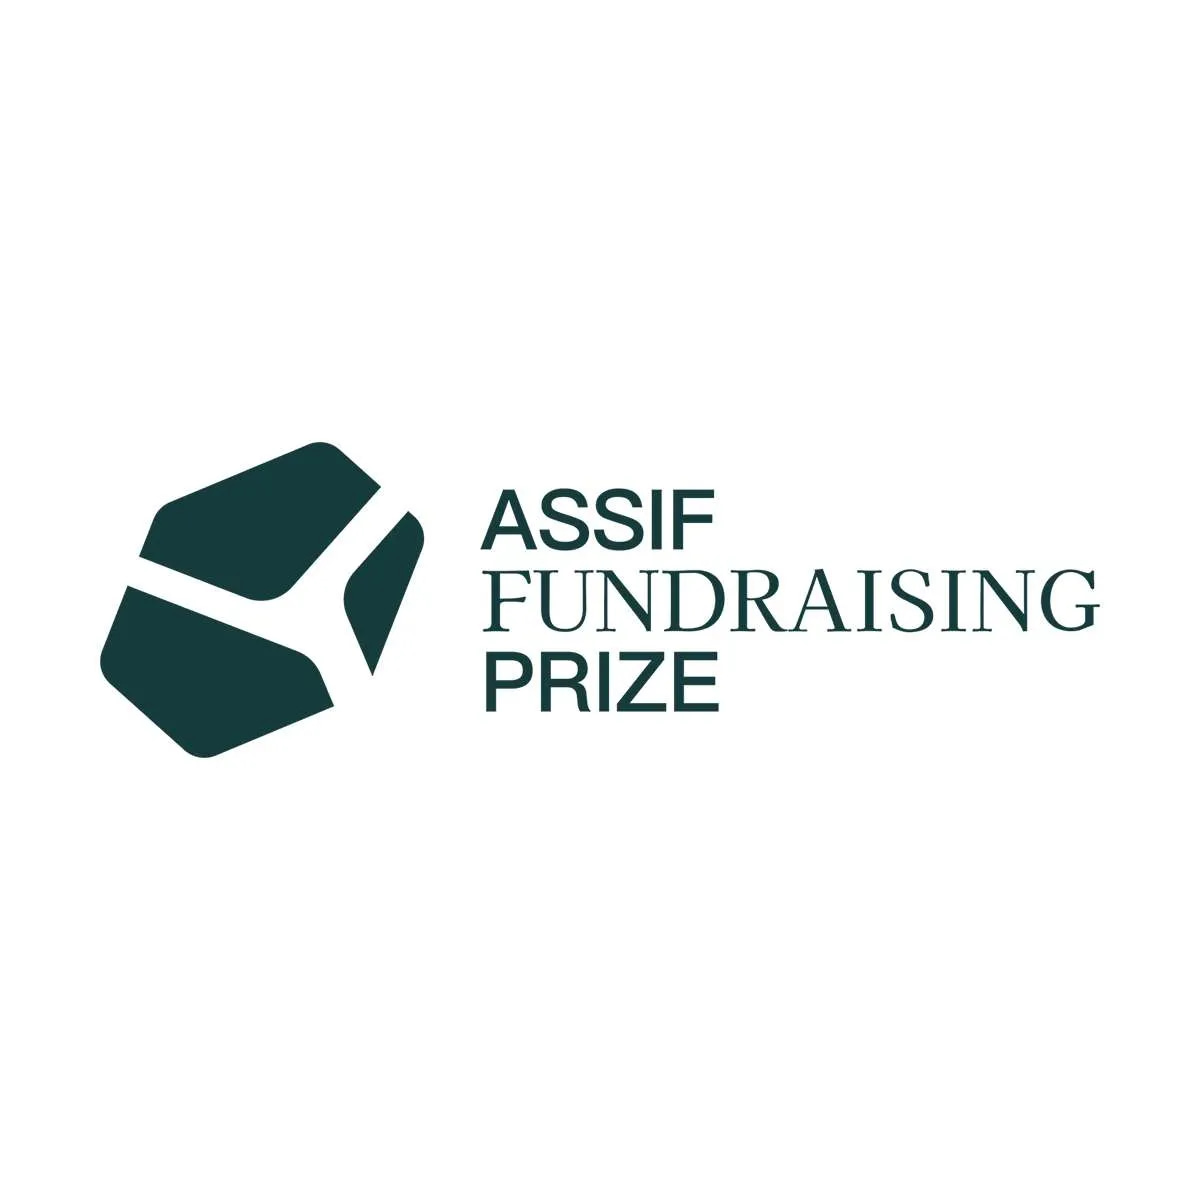 ASSIF Fundraising Prize